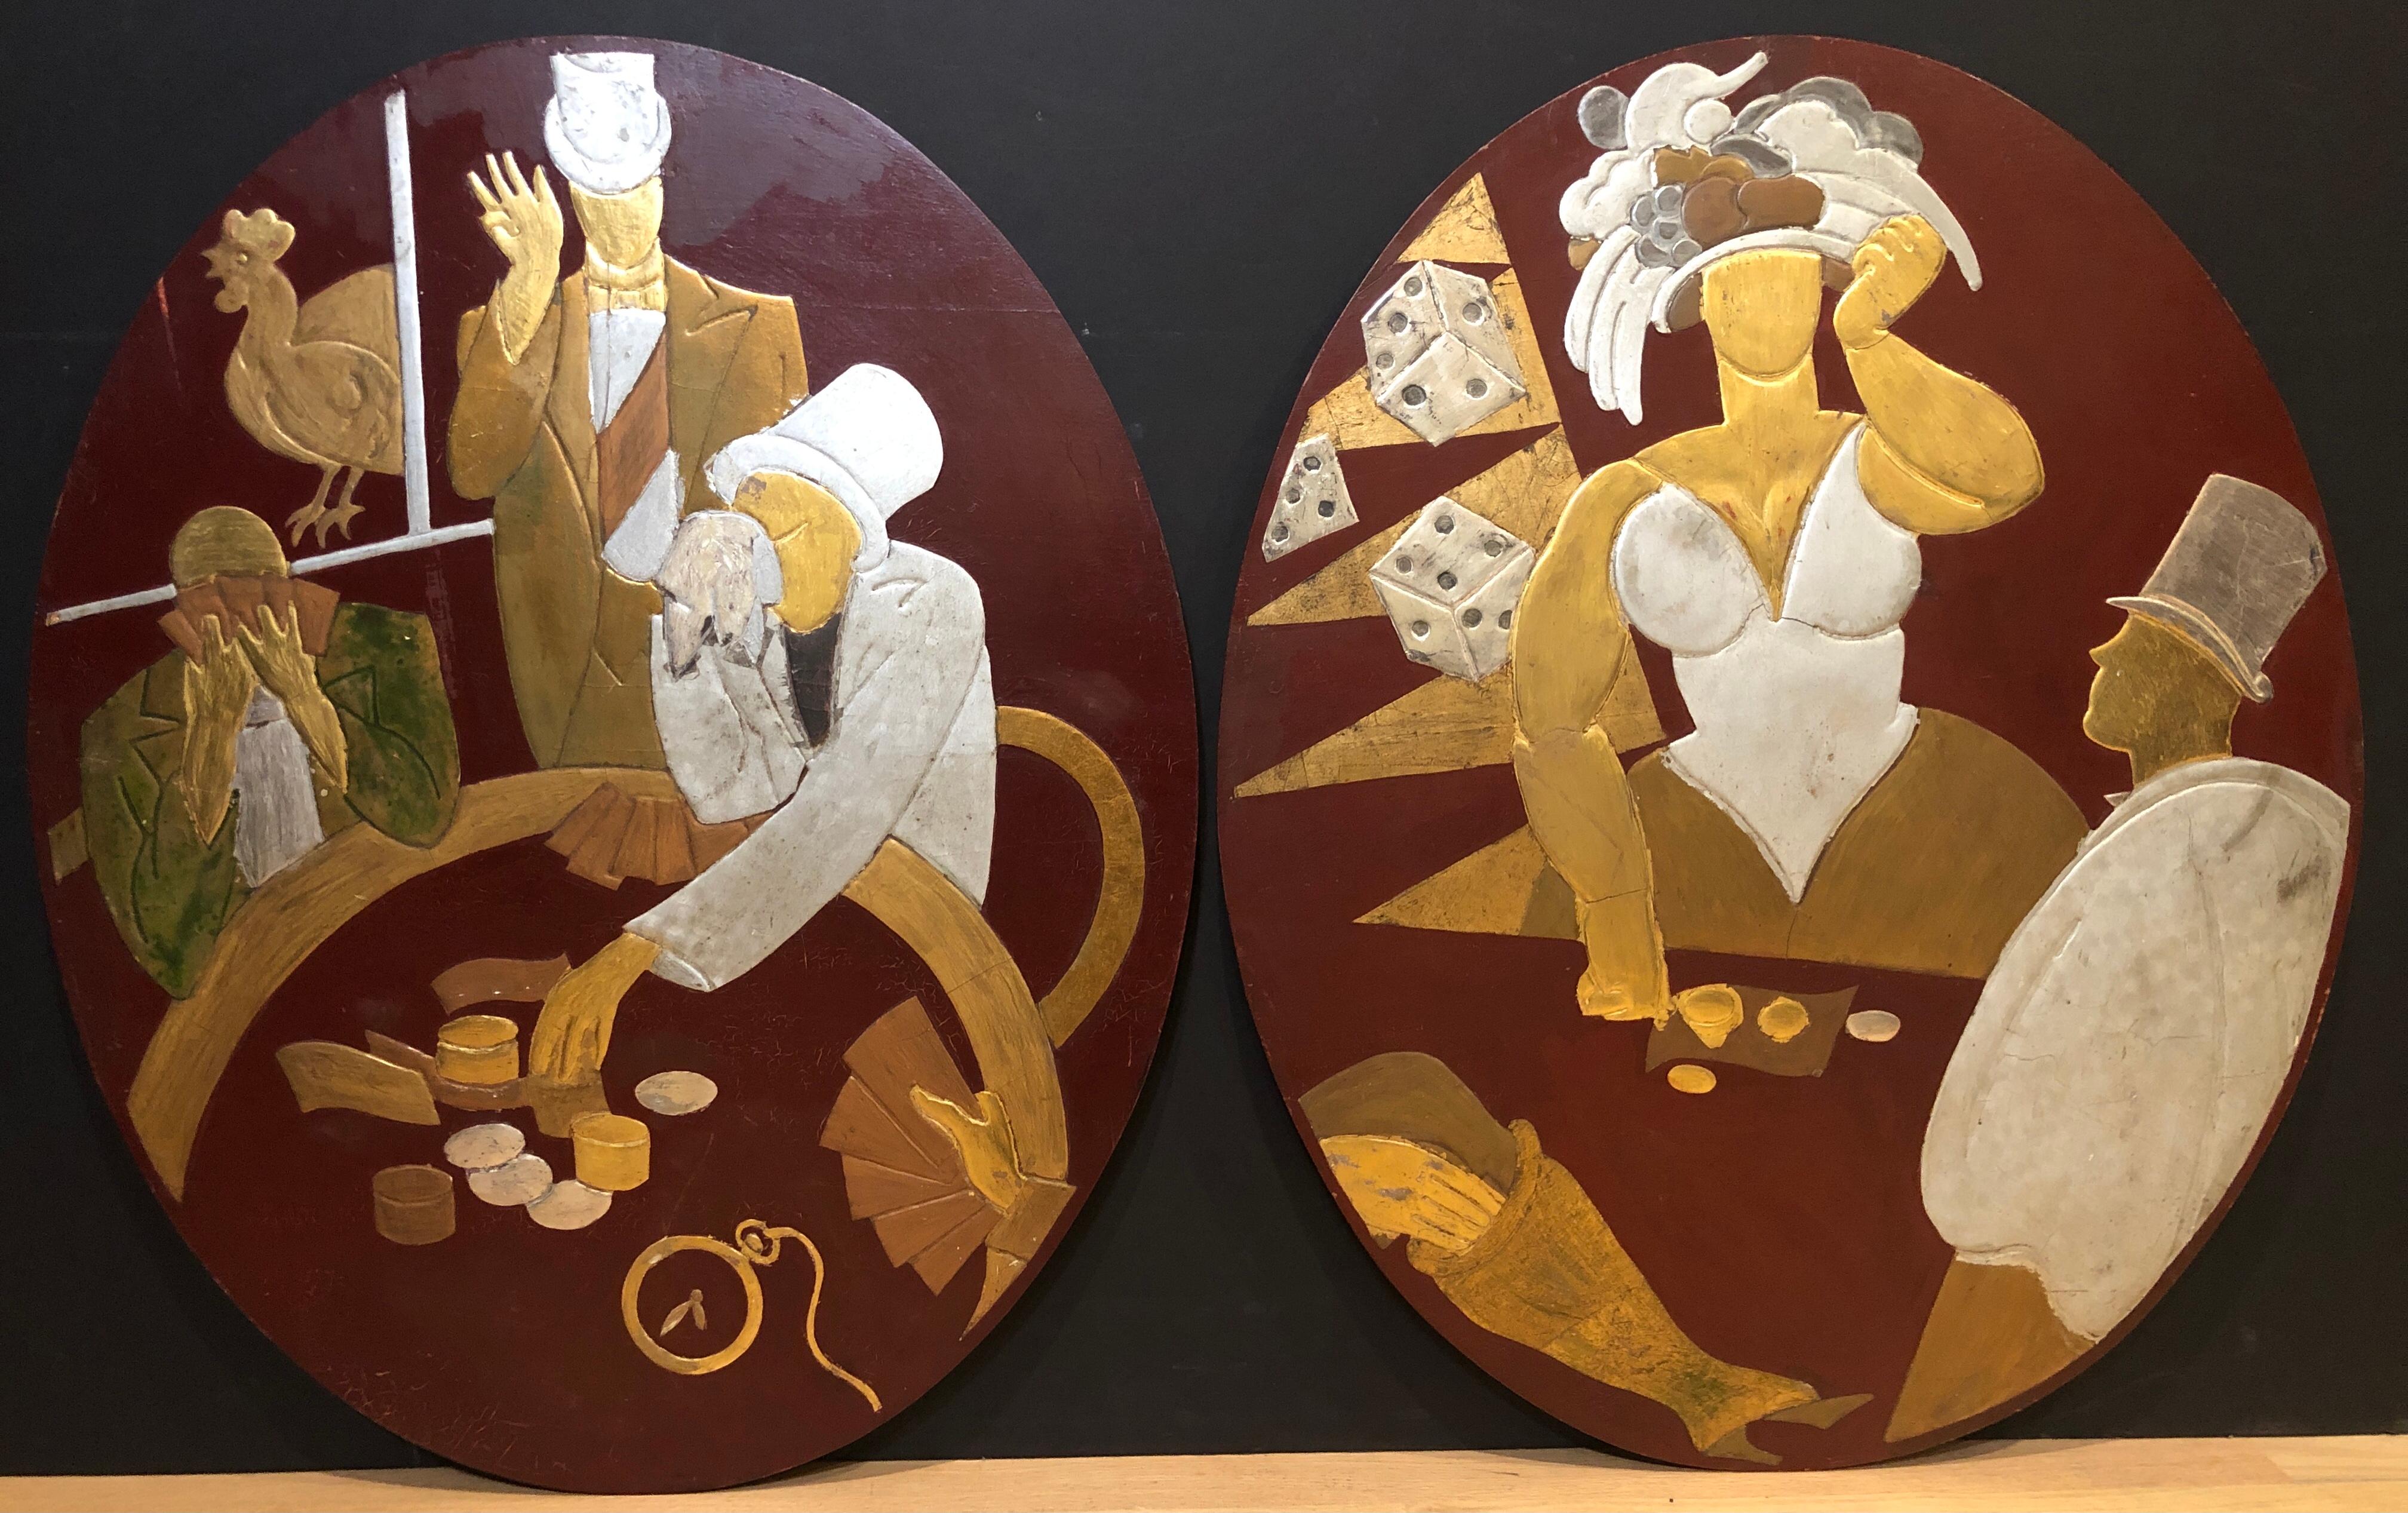 Pair of painted, carved and gilt panels in relief of gaming and gambling casino scenes. Figural wood relief carving with gold and silver gilt with painted background. The pair shows gambling and gaming scenes with men and women.